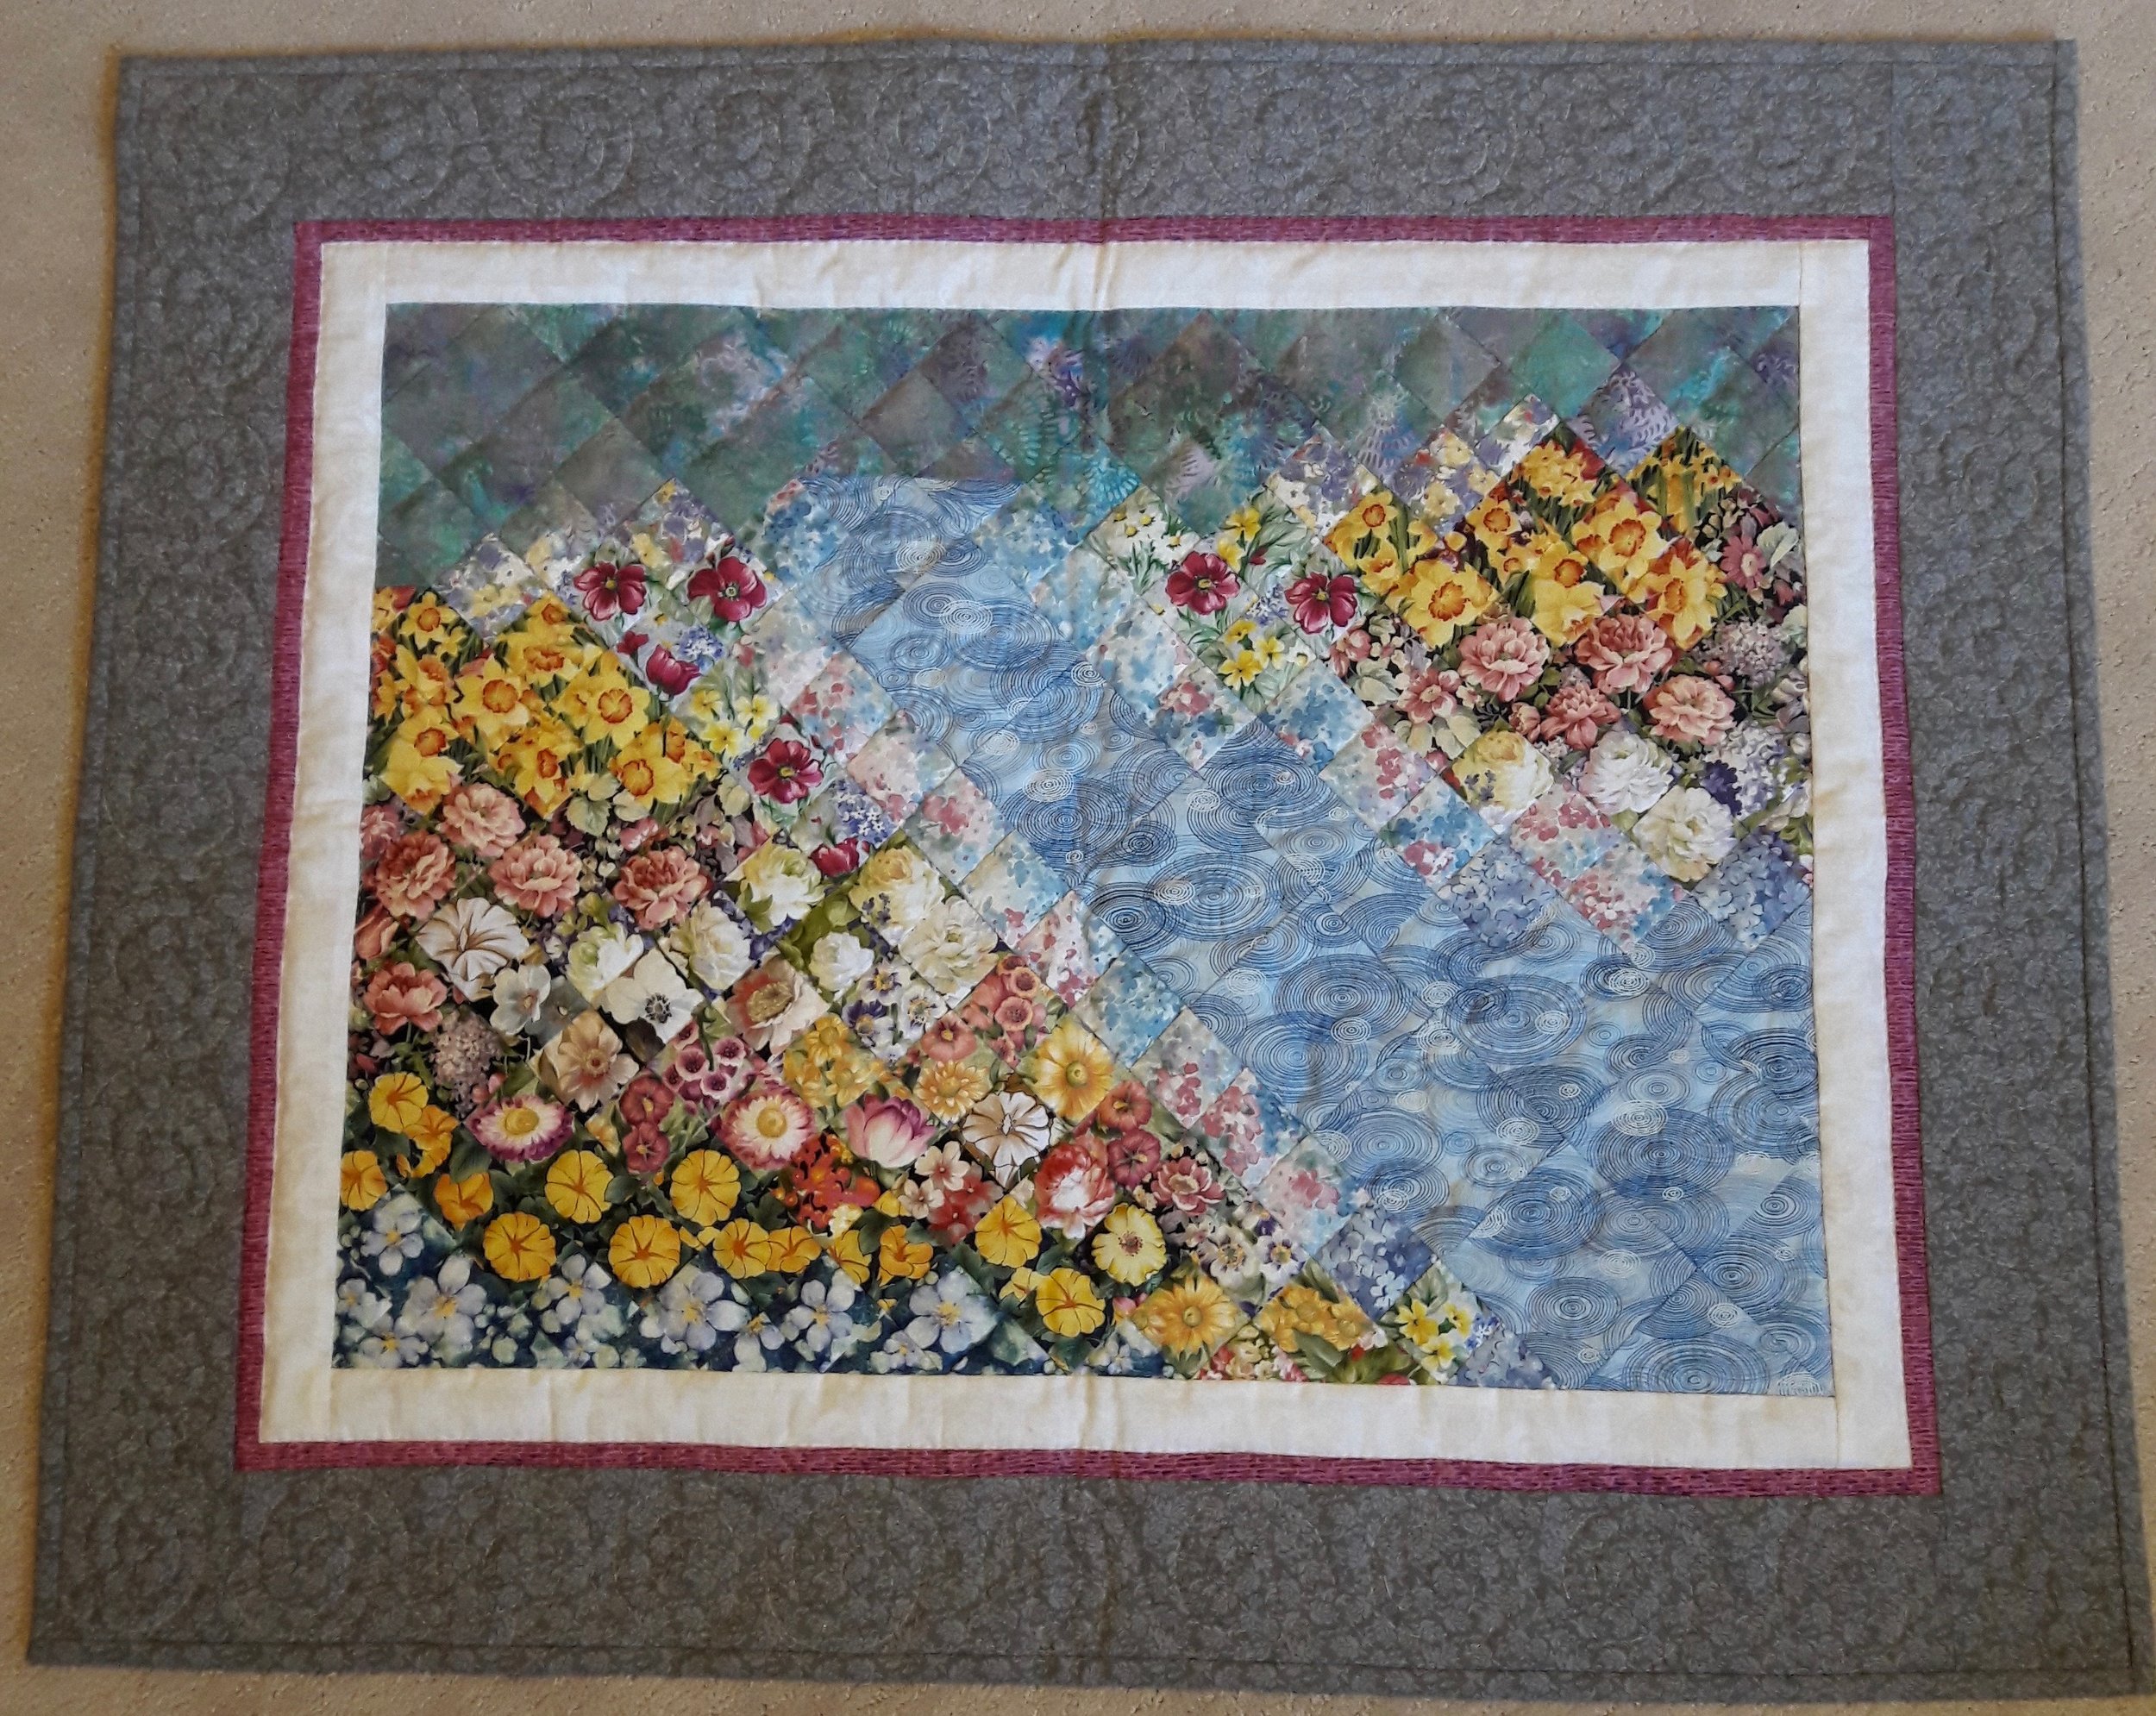 April Showers, May Flowers, Designed &amp; Pieced by Cindy Helmuth, Hand Quilted by Eunice Chupp, donated by Cindy Helmuth, 27 x 34”